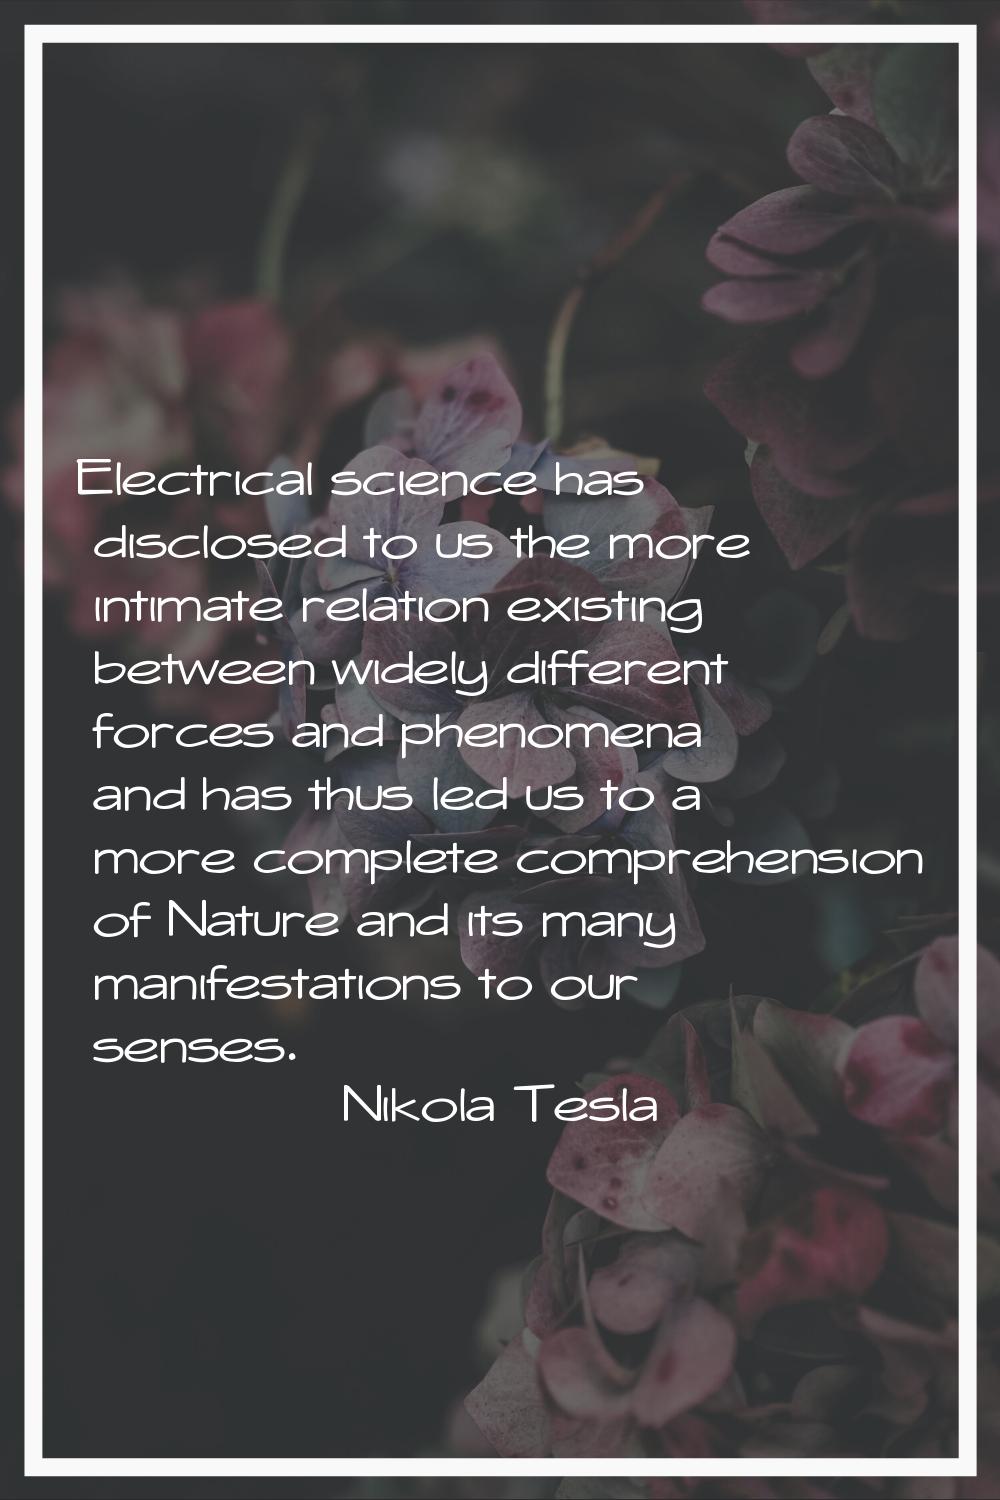 Electrical science has disclosed to us the more intimate relation existing between widely different